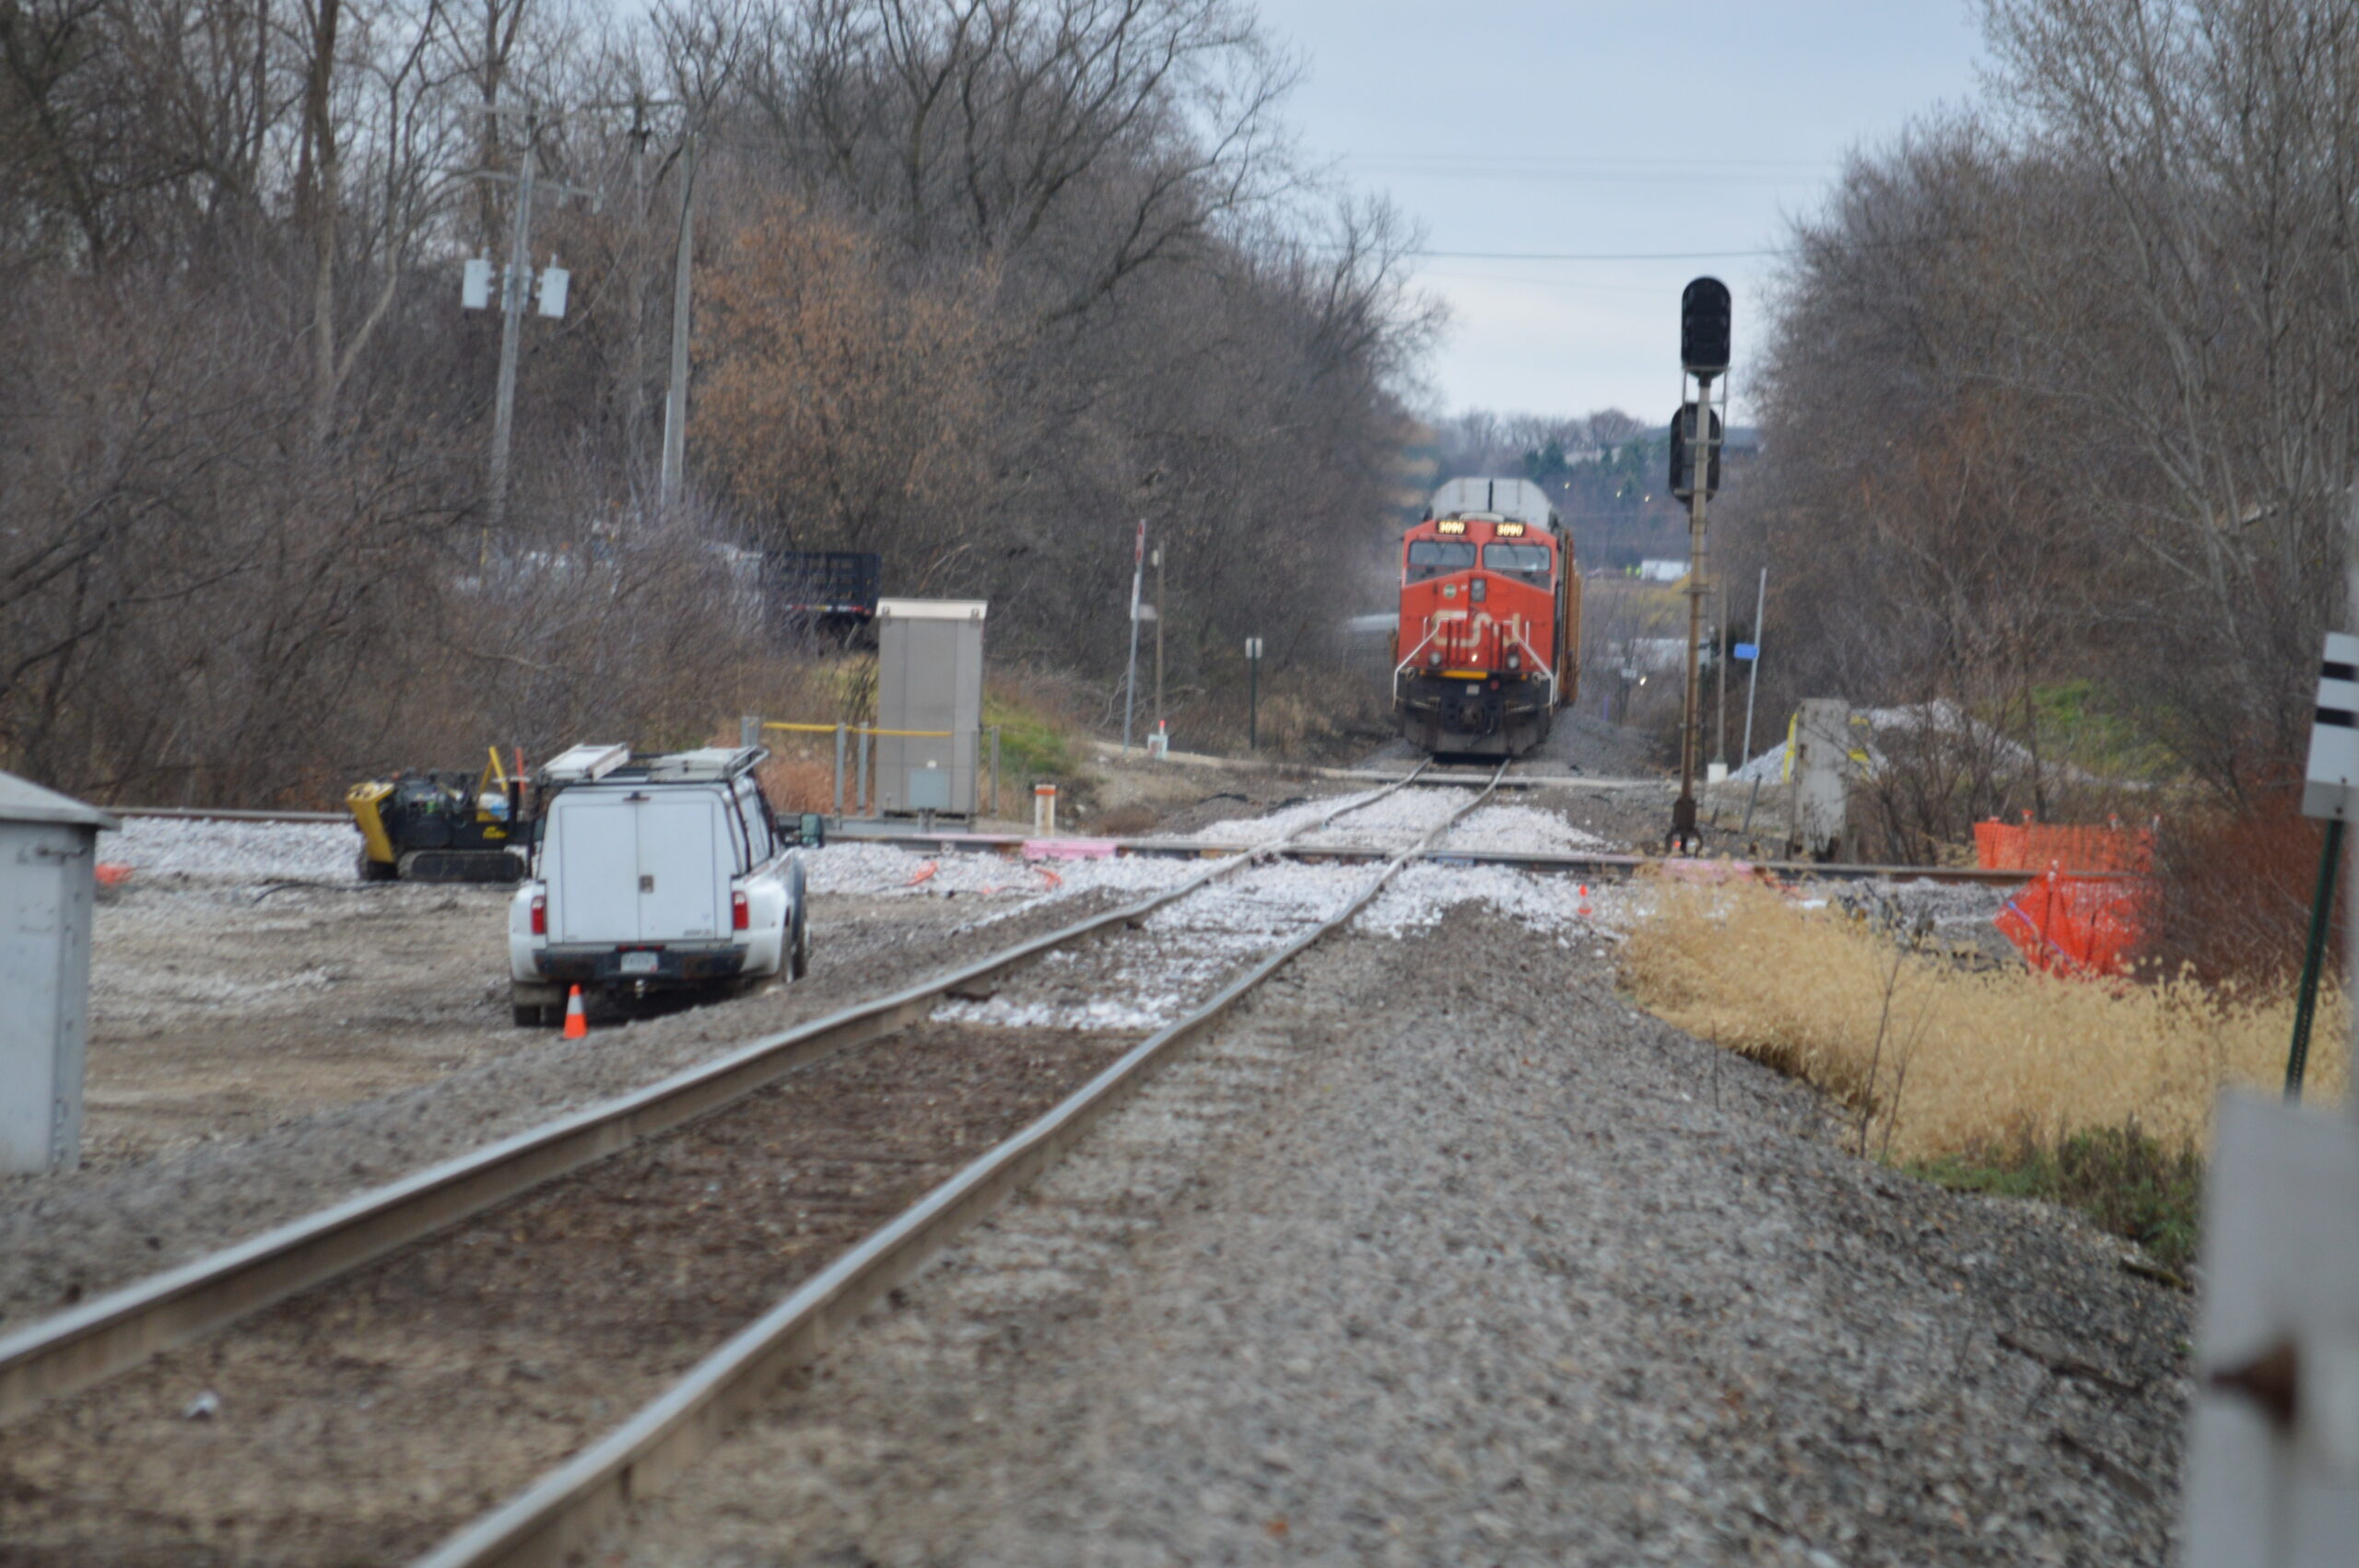 A red-nosed Canadian National diesel sits on the other side of the crossing where fresh ballast lays between the tracks.